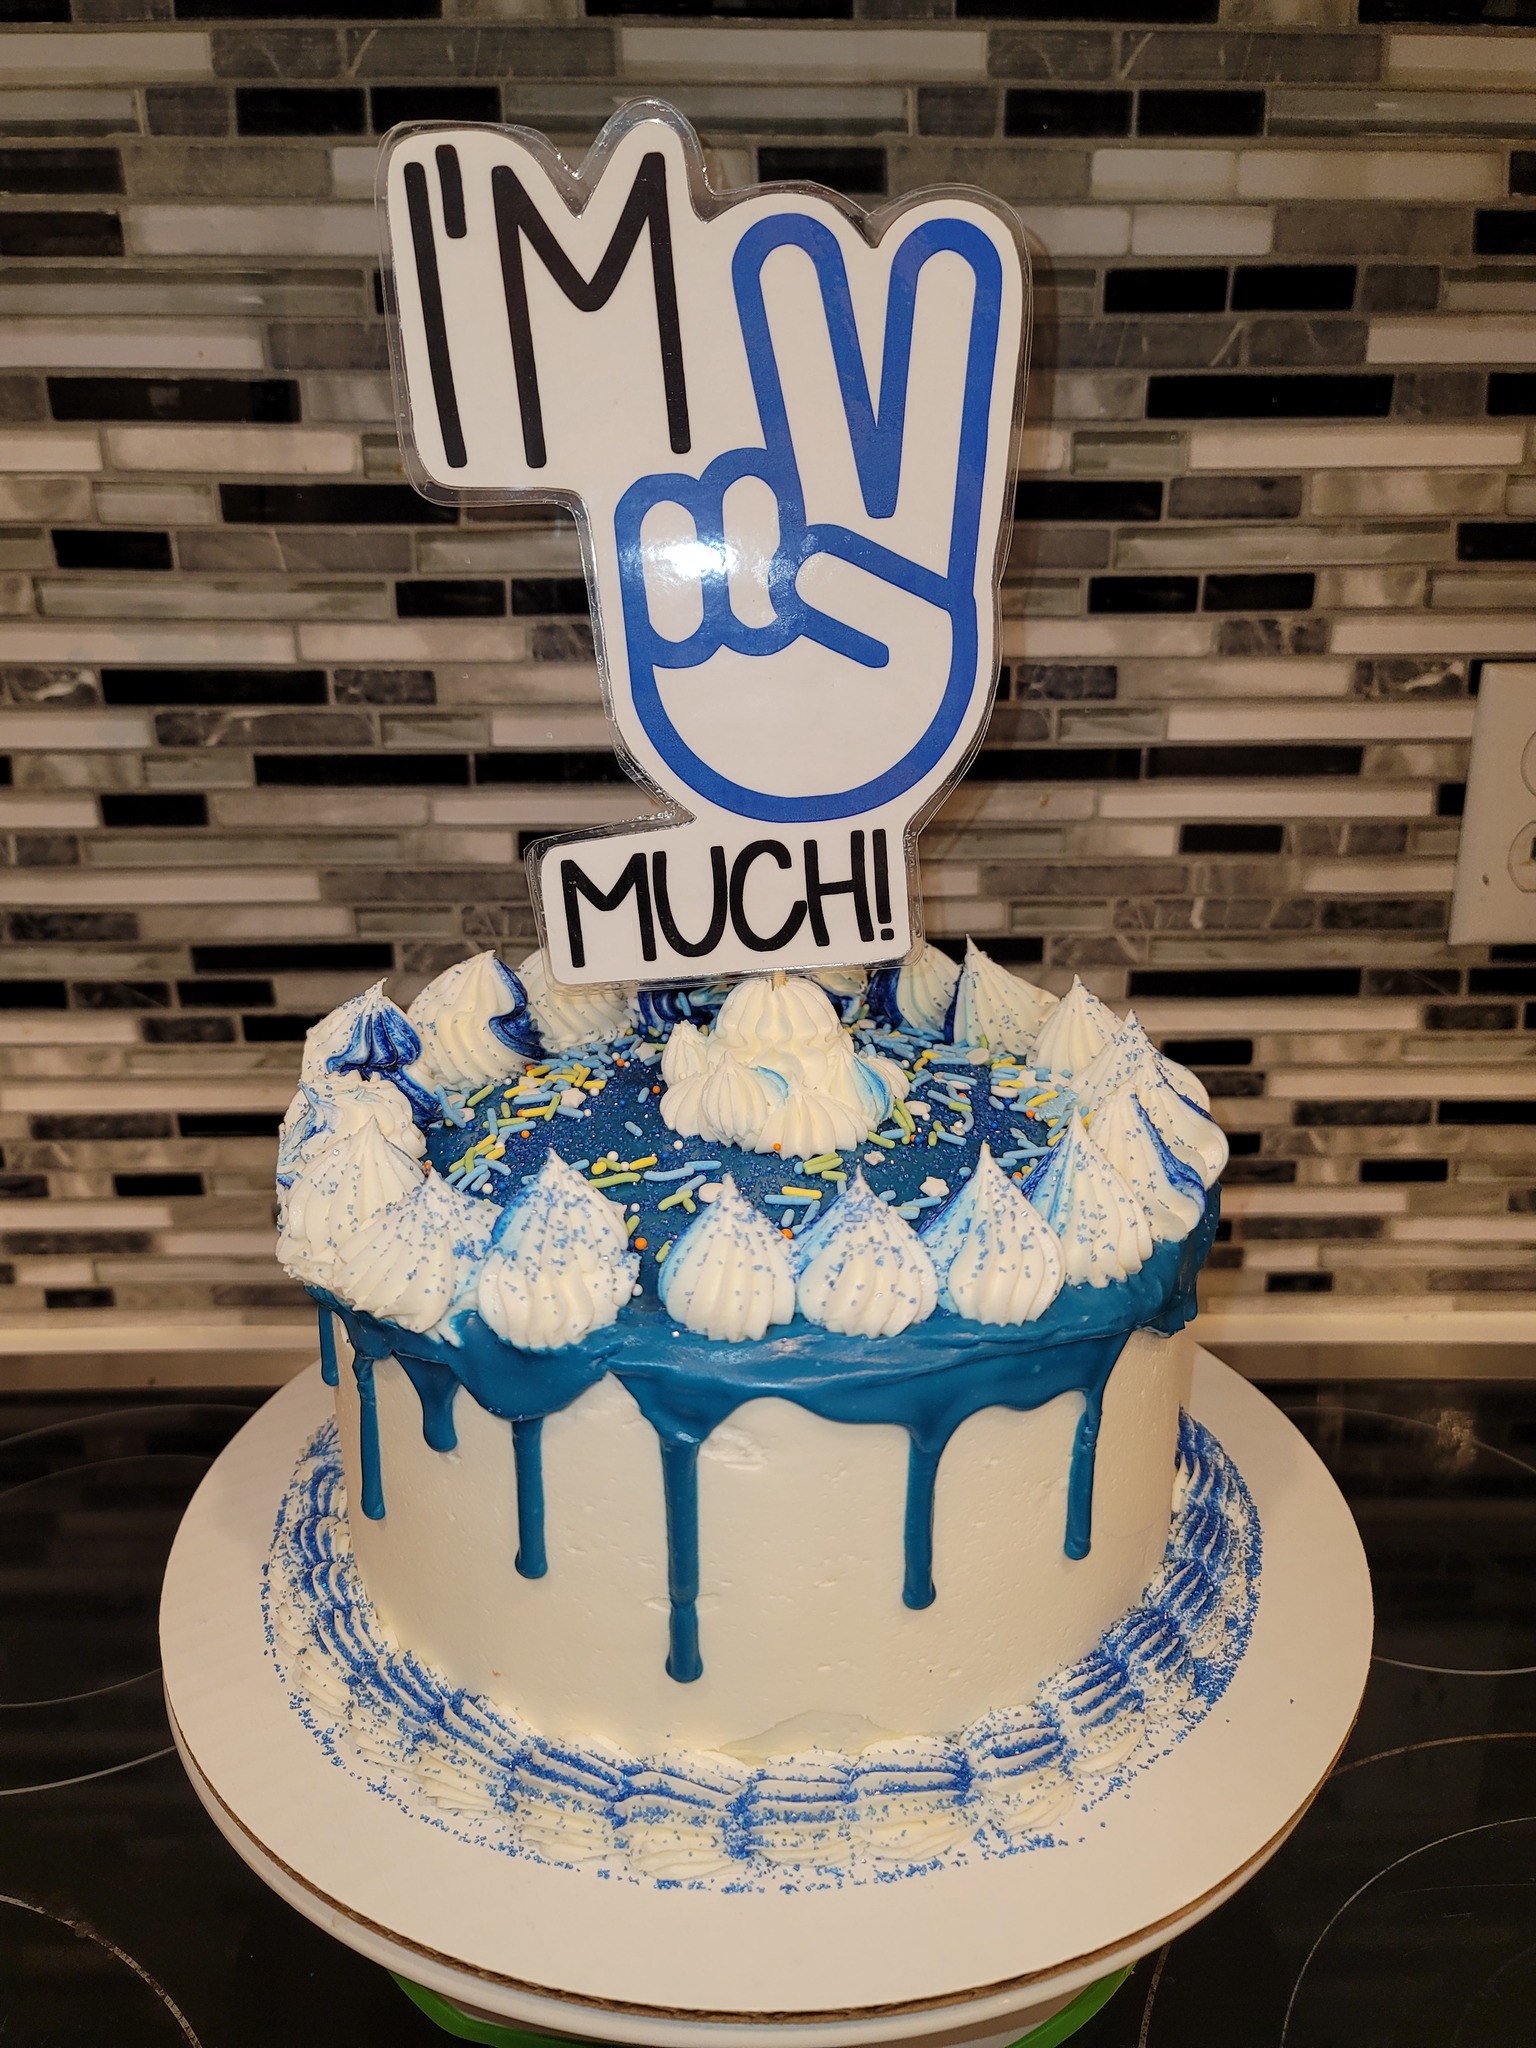 Custom white cake with blue frosting Made by Nan's Nummies